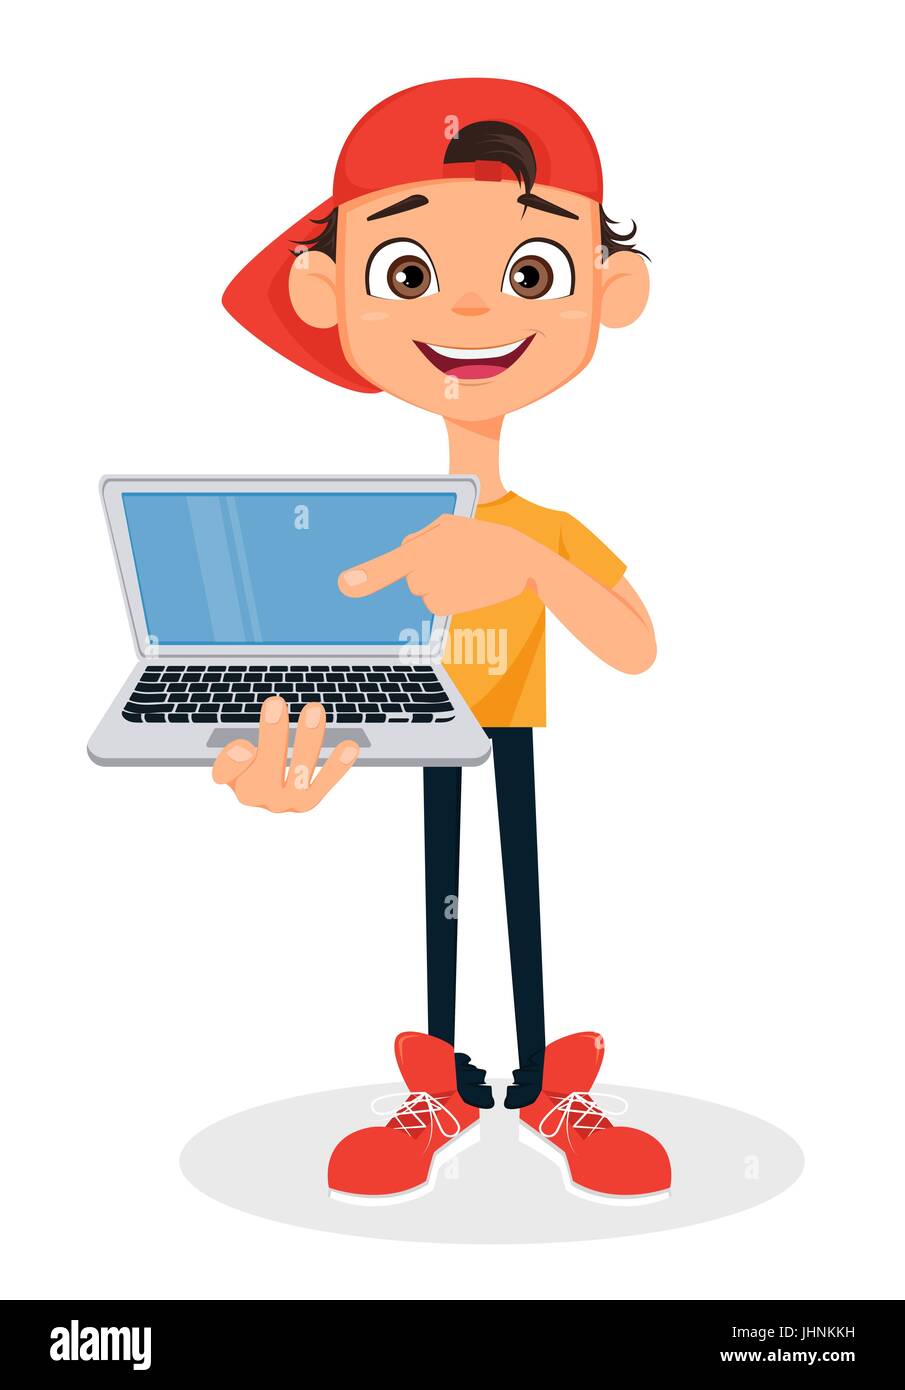 Cool boy in cap holding laptop. Cute cartoon character. Vector illustration. Stock Vector